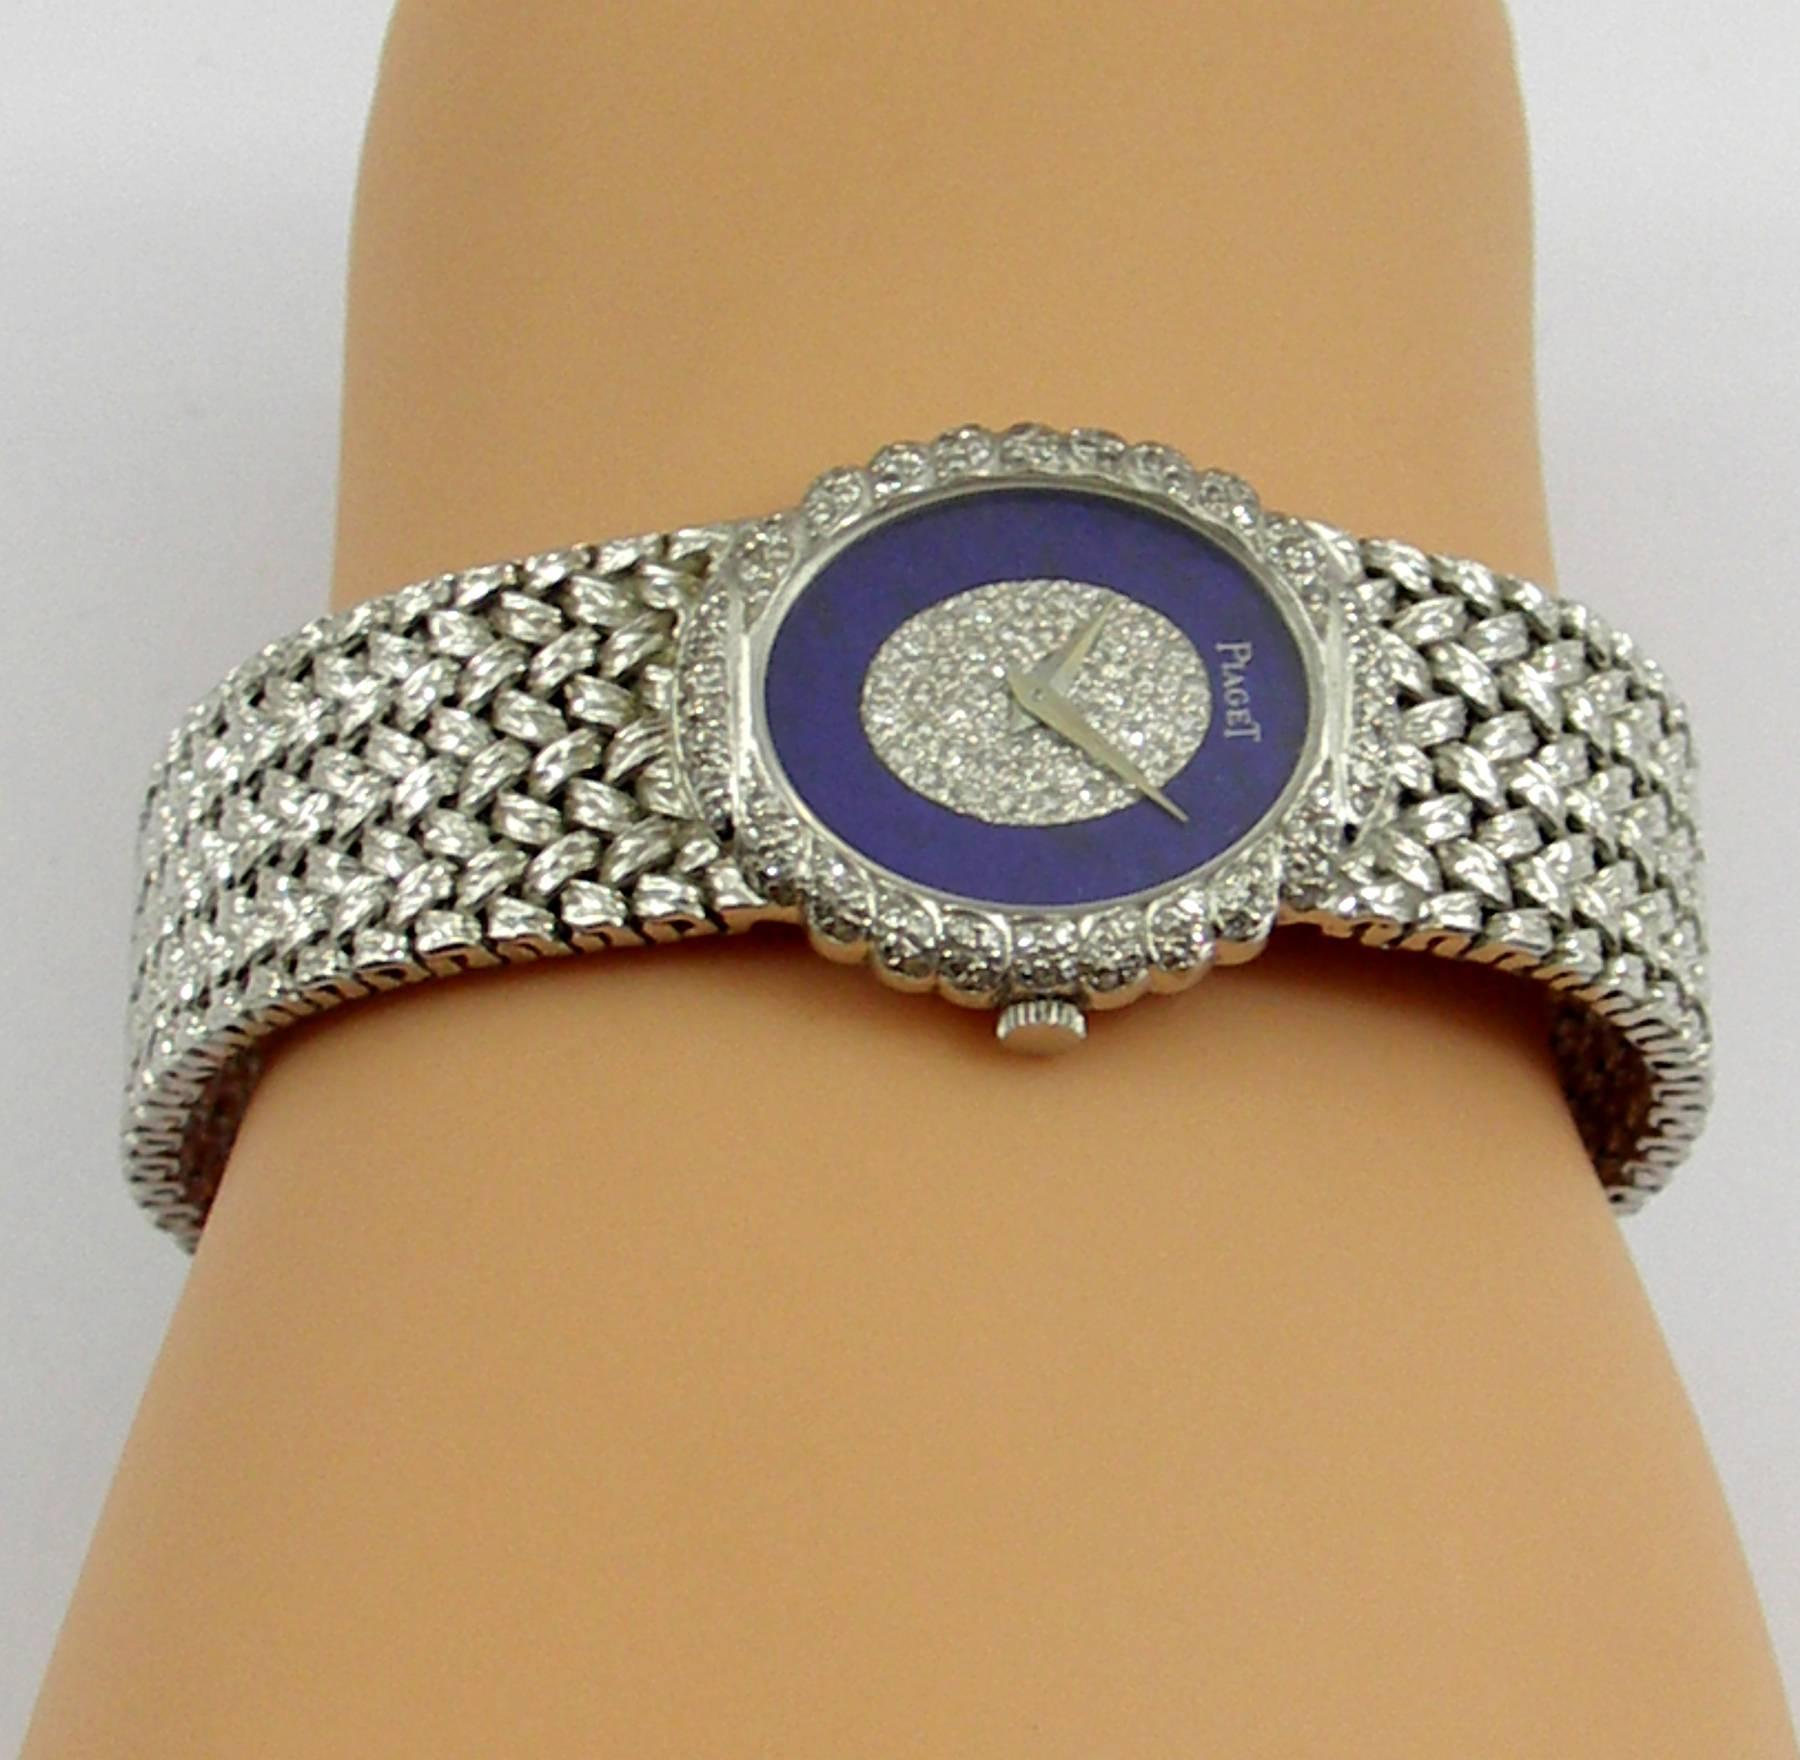 A lady's 18K white gold Piaget wristwatch centered around a unique Dial comprised of an outer ring of lapis lazuli, with the middle of the dial pave' set with diamonds. The bezel features a scalloped edge which is also encrusted with diamonds. Case